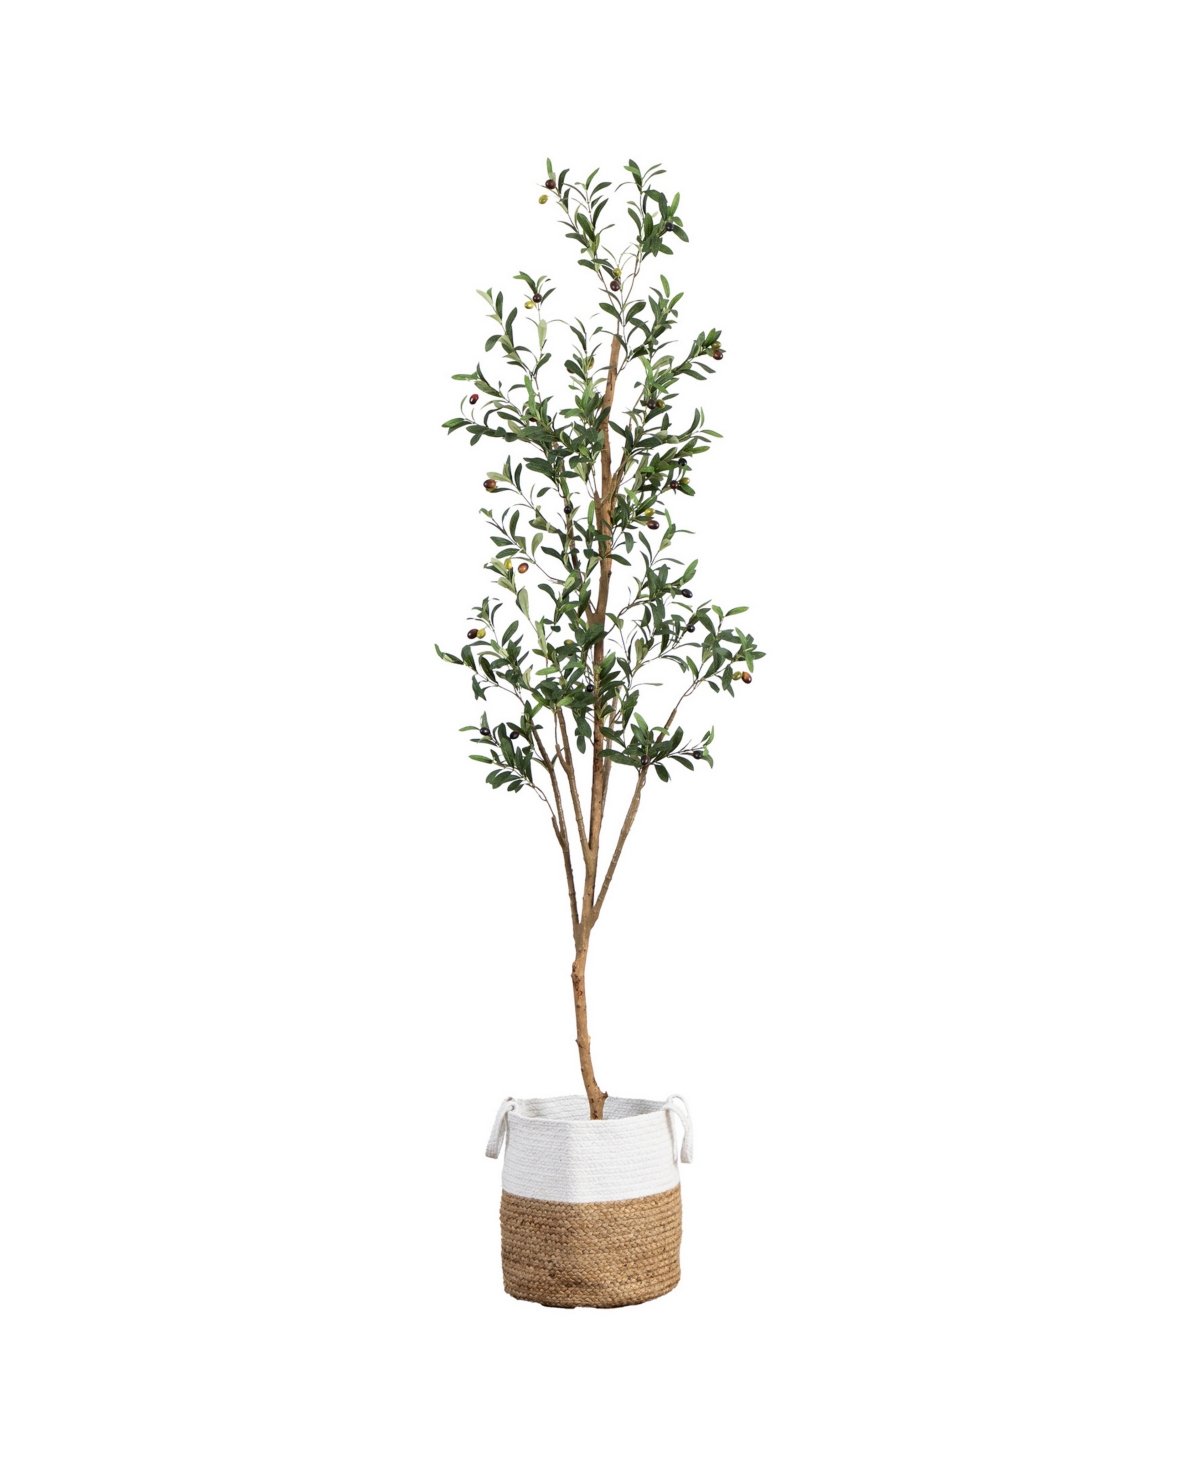 7ft. Artificial Olive Tree with Natural Trunk and Handmade Jute Basket - Green